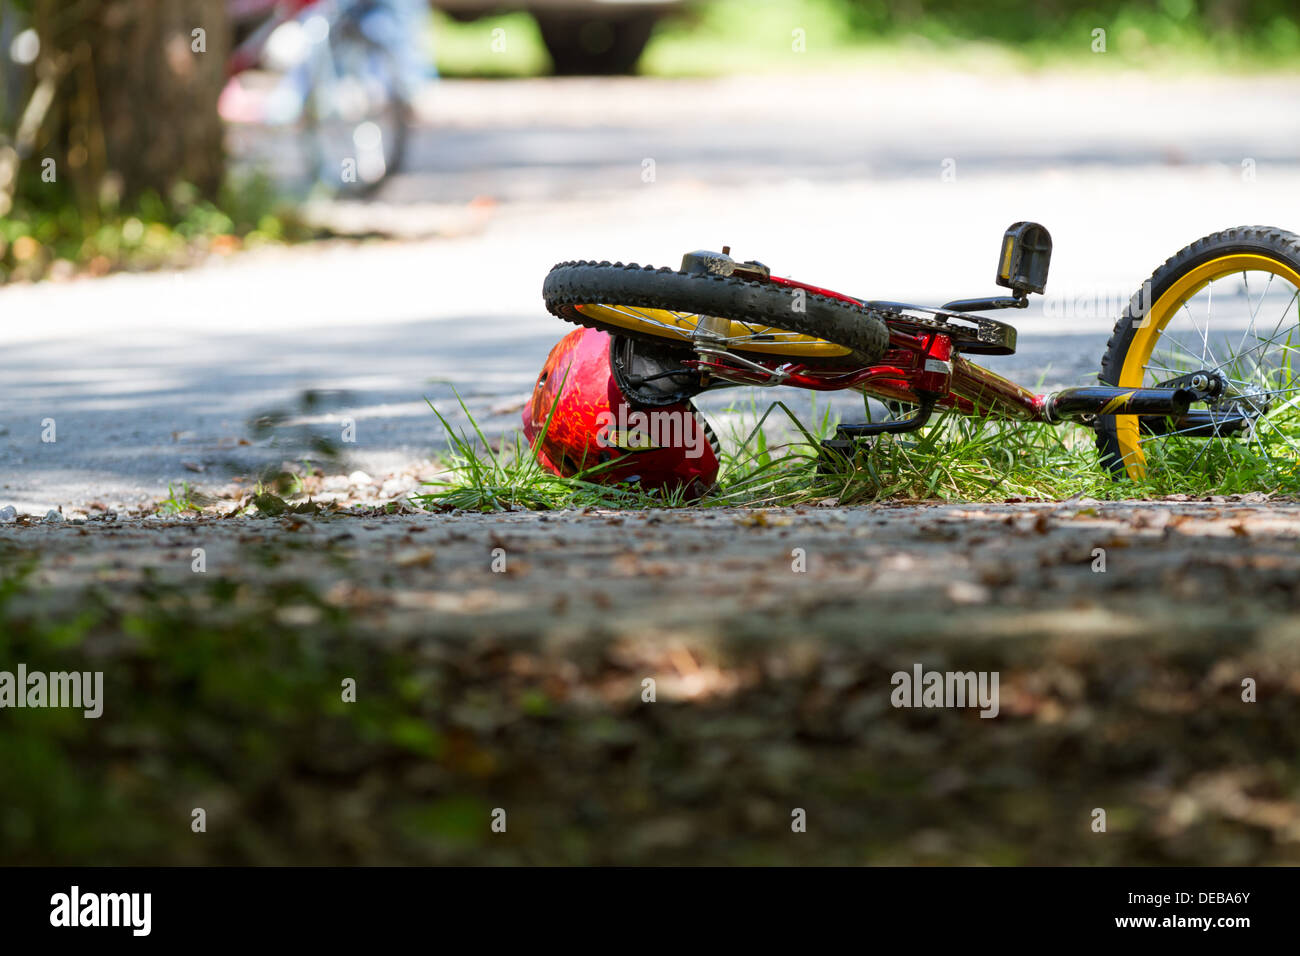 BMX bicycle lying abandoned in the road Stock Photo